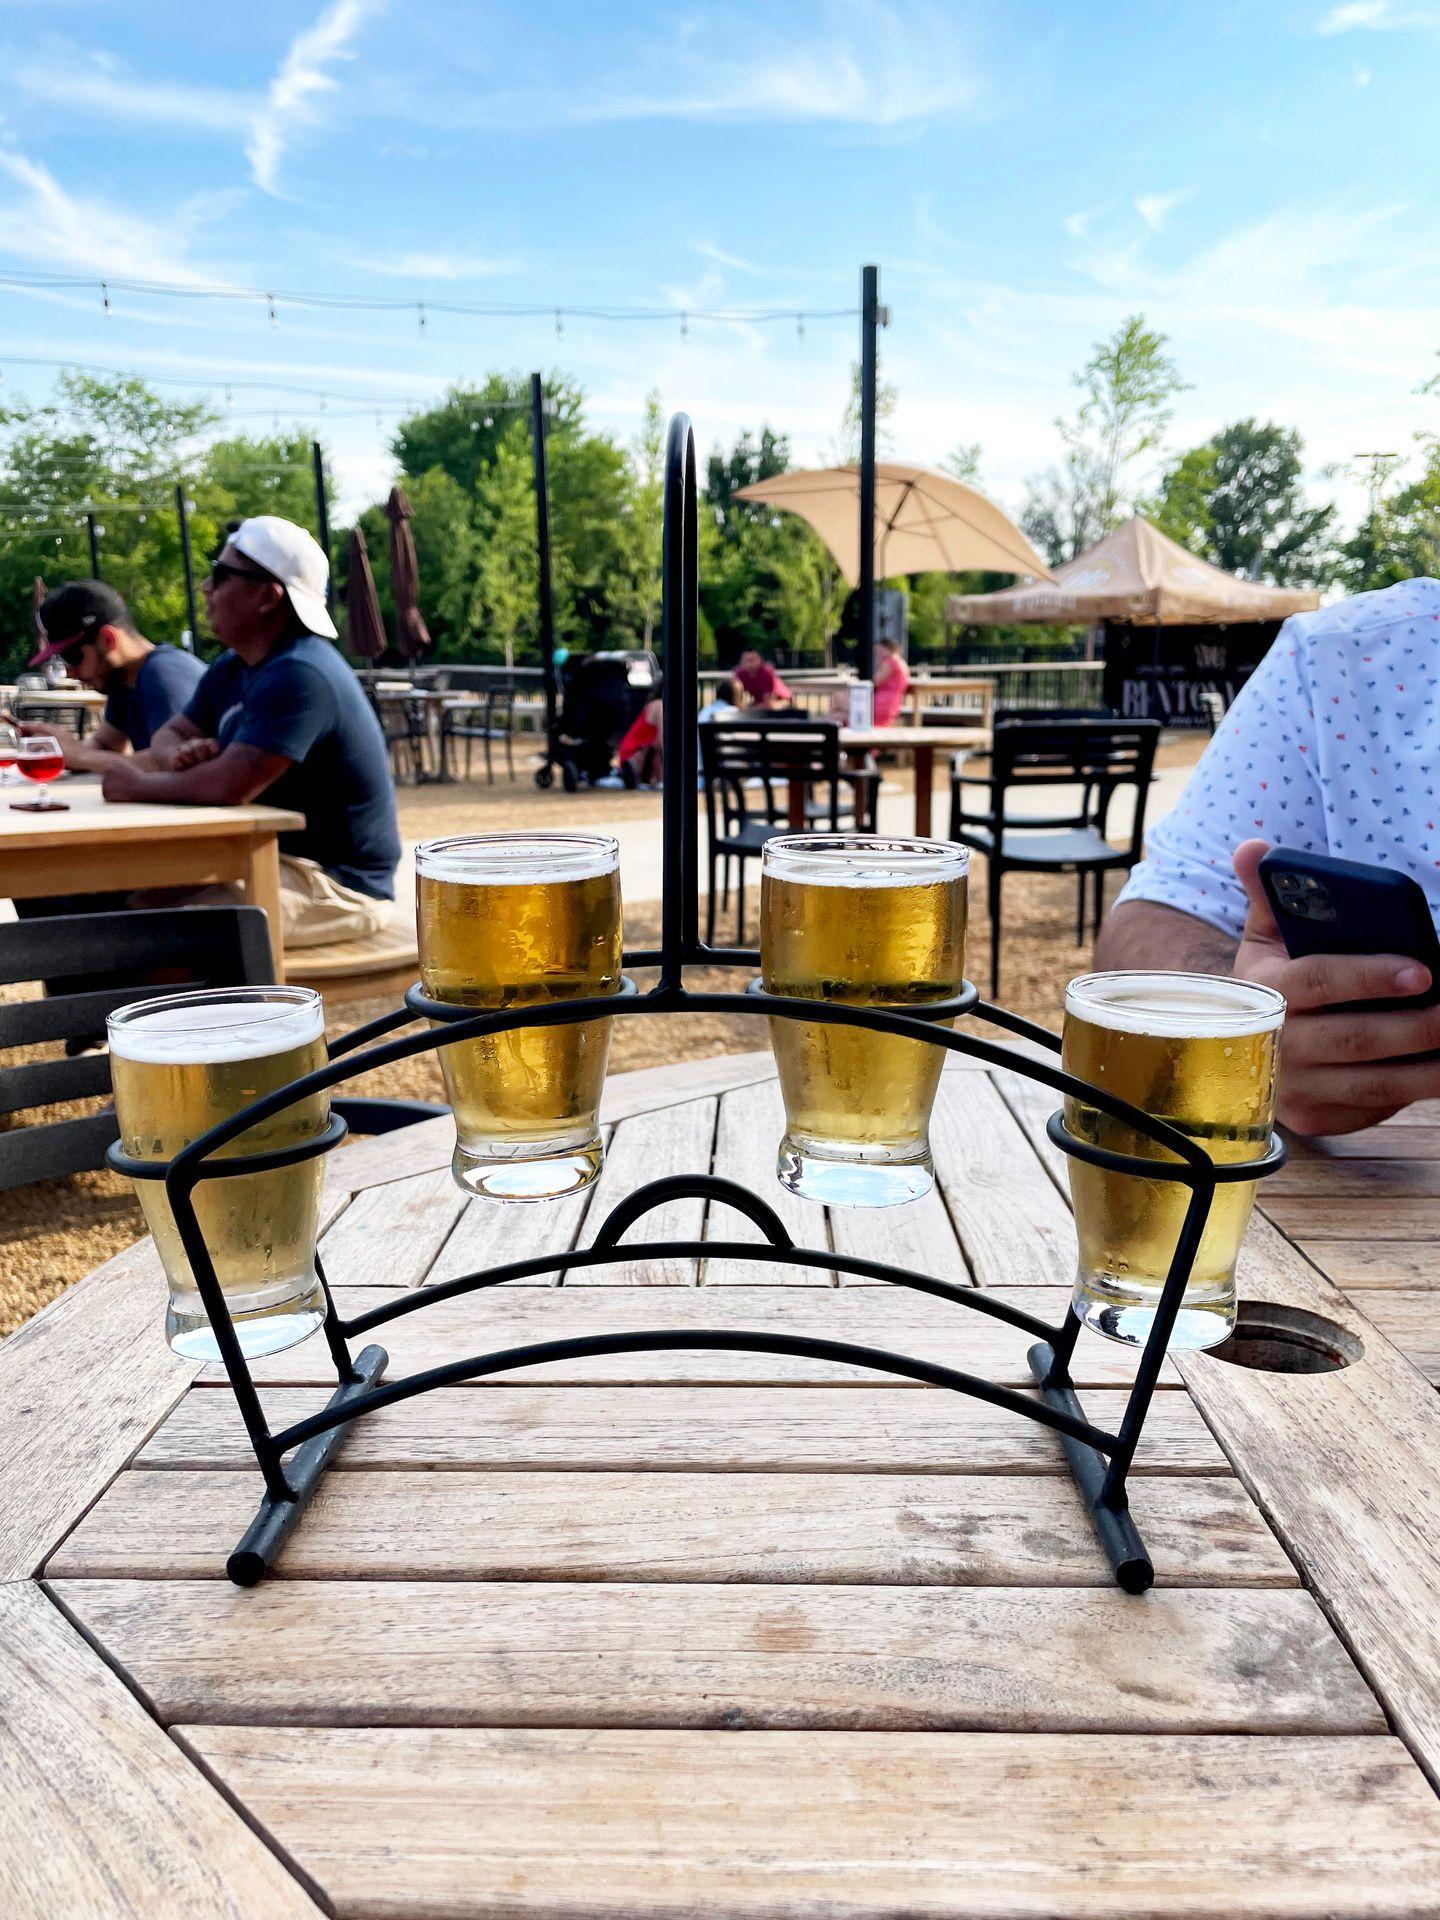 A flight of 4 beers sitting on an outdoor table.